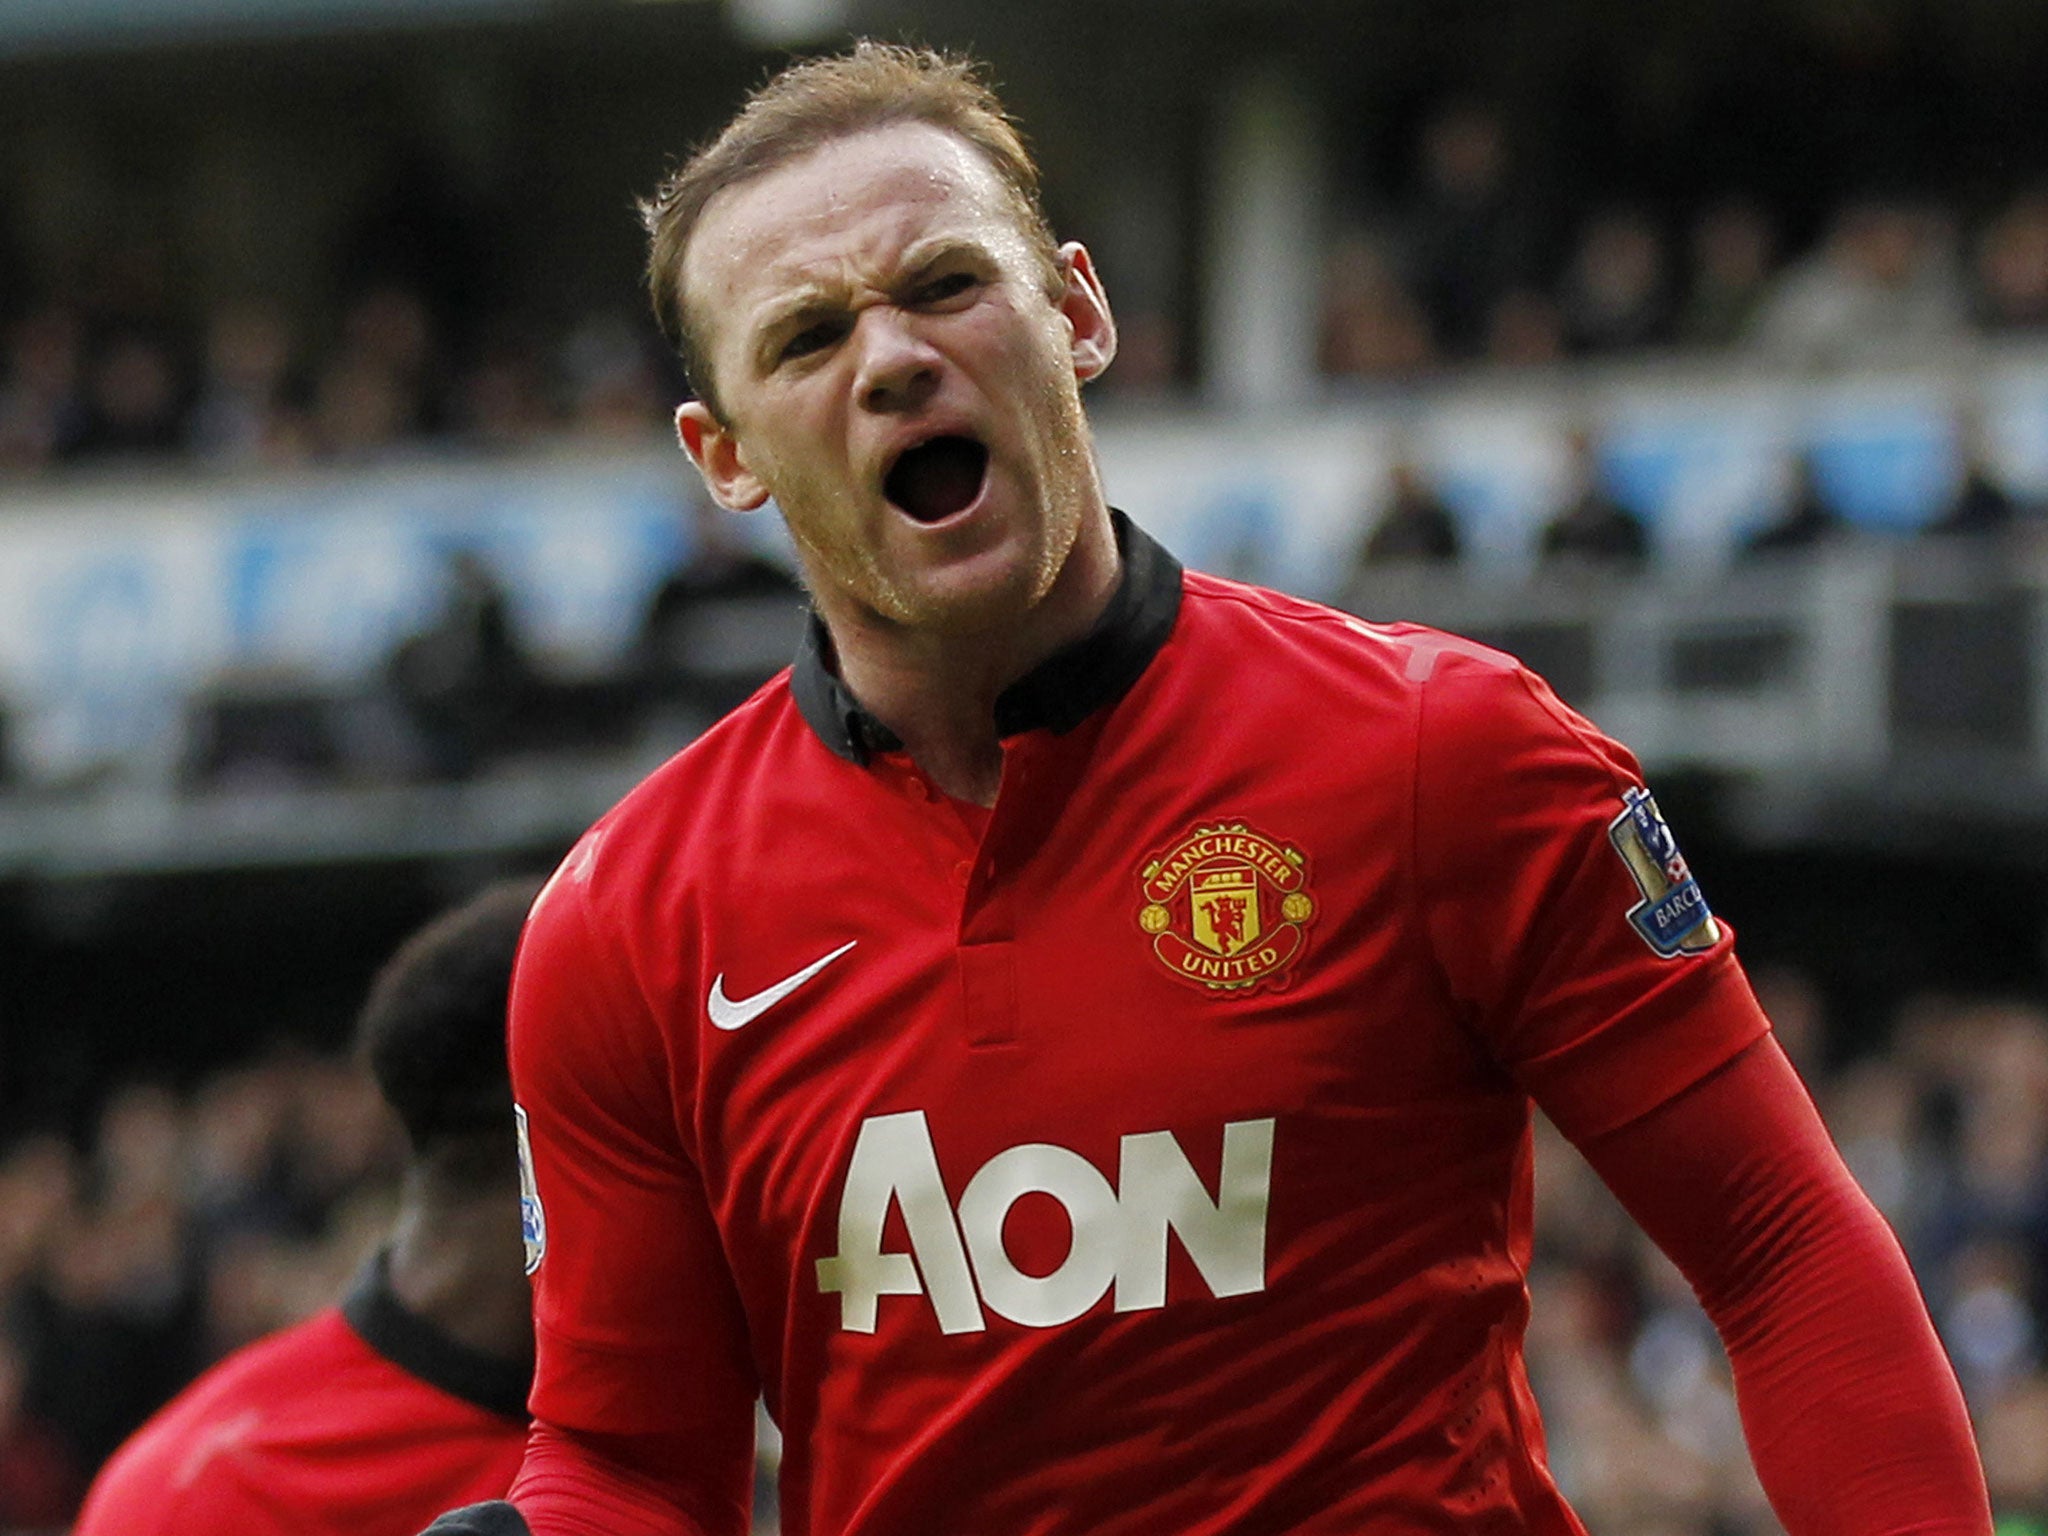 Wayne Rooney is one short of his 150th Premier League goal for Manchester United